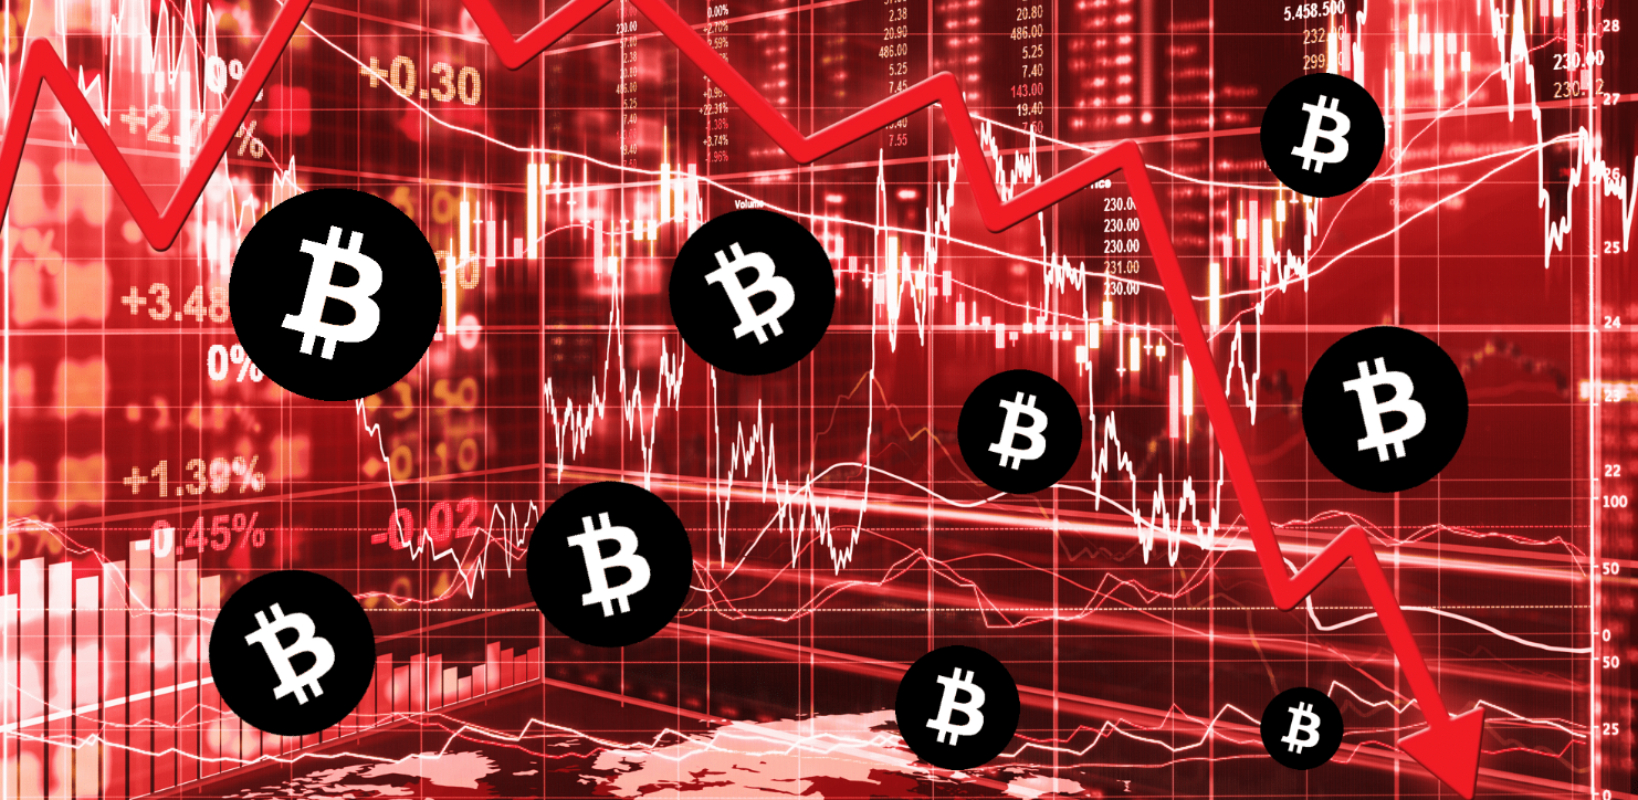 Will the cryptocurrency market recover?